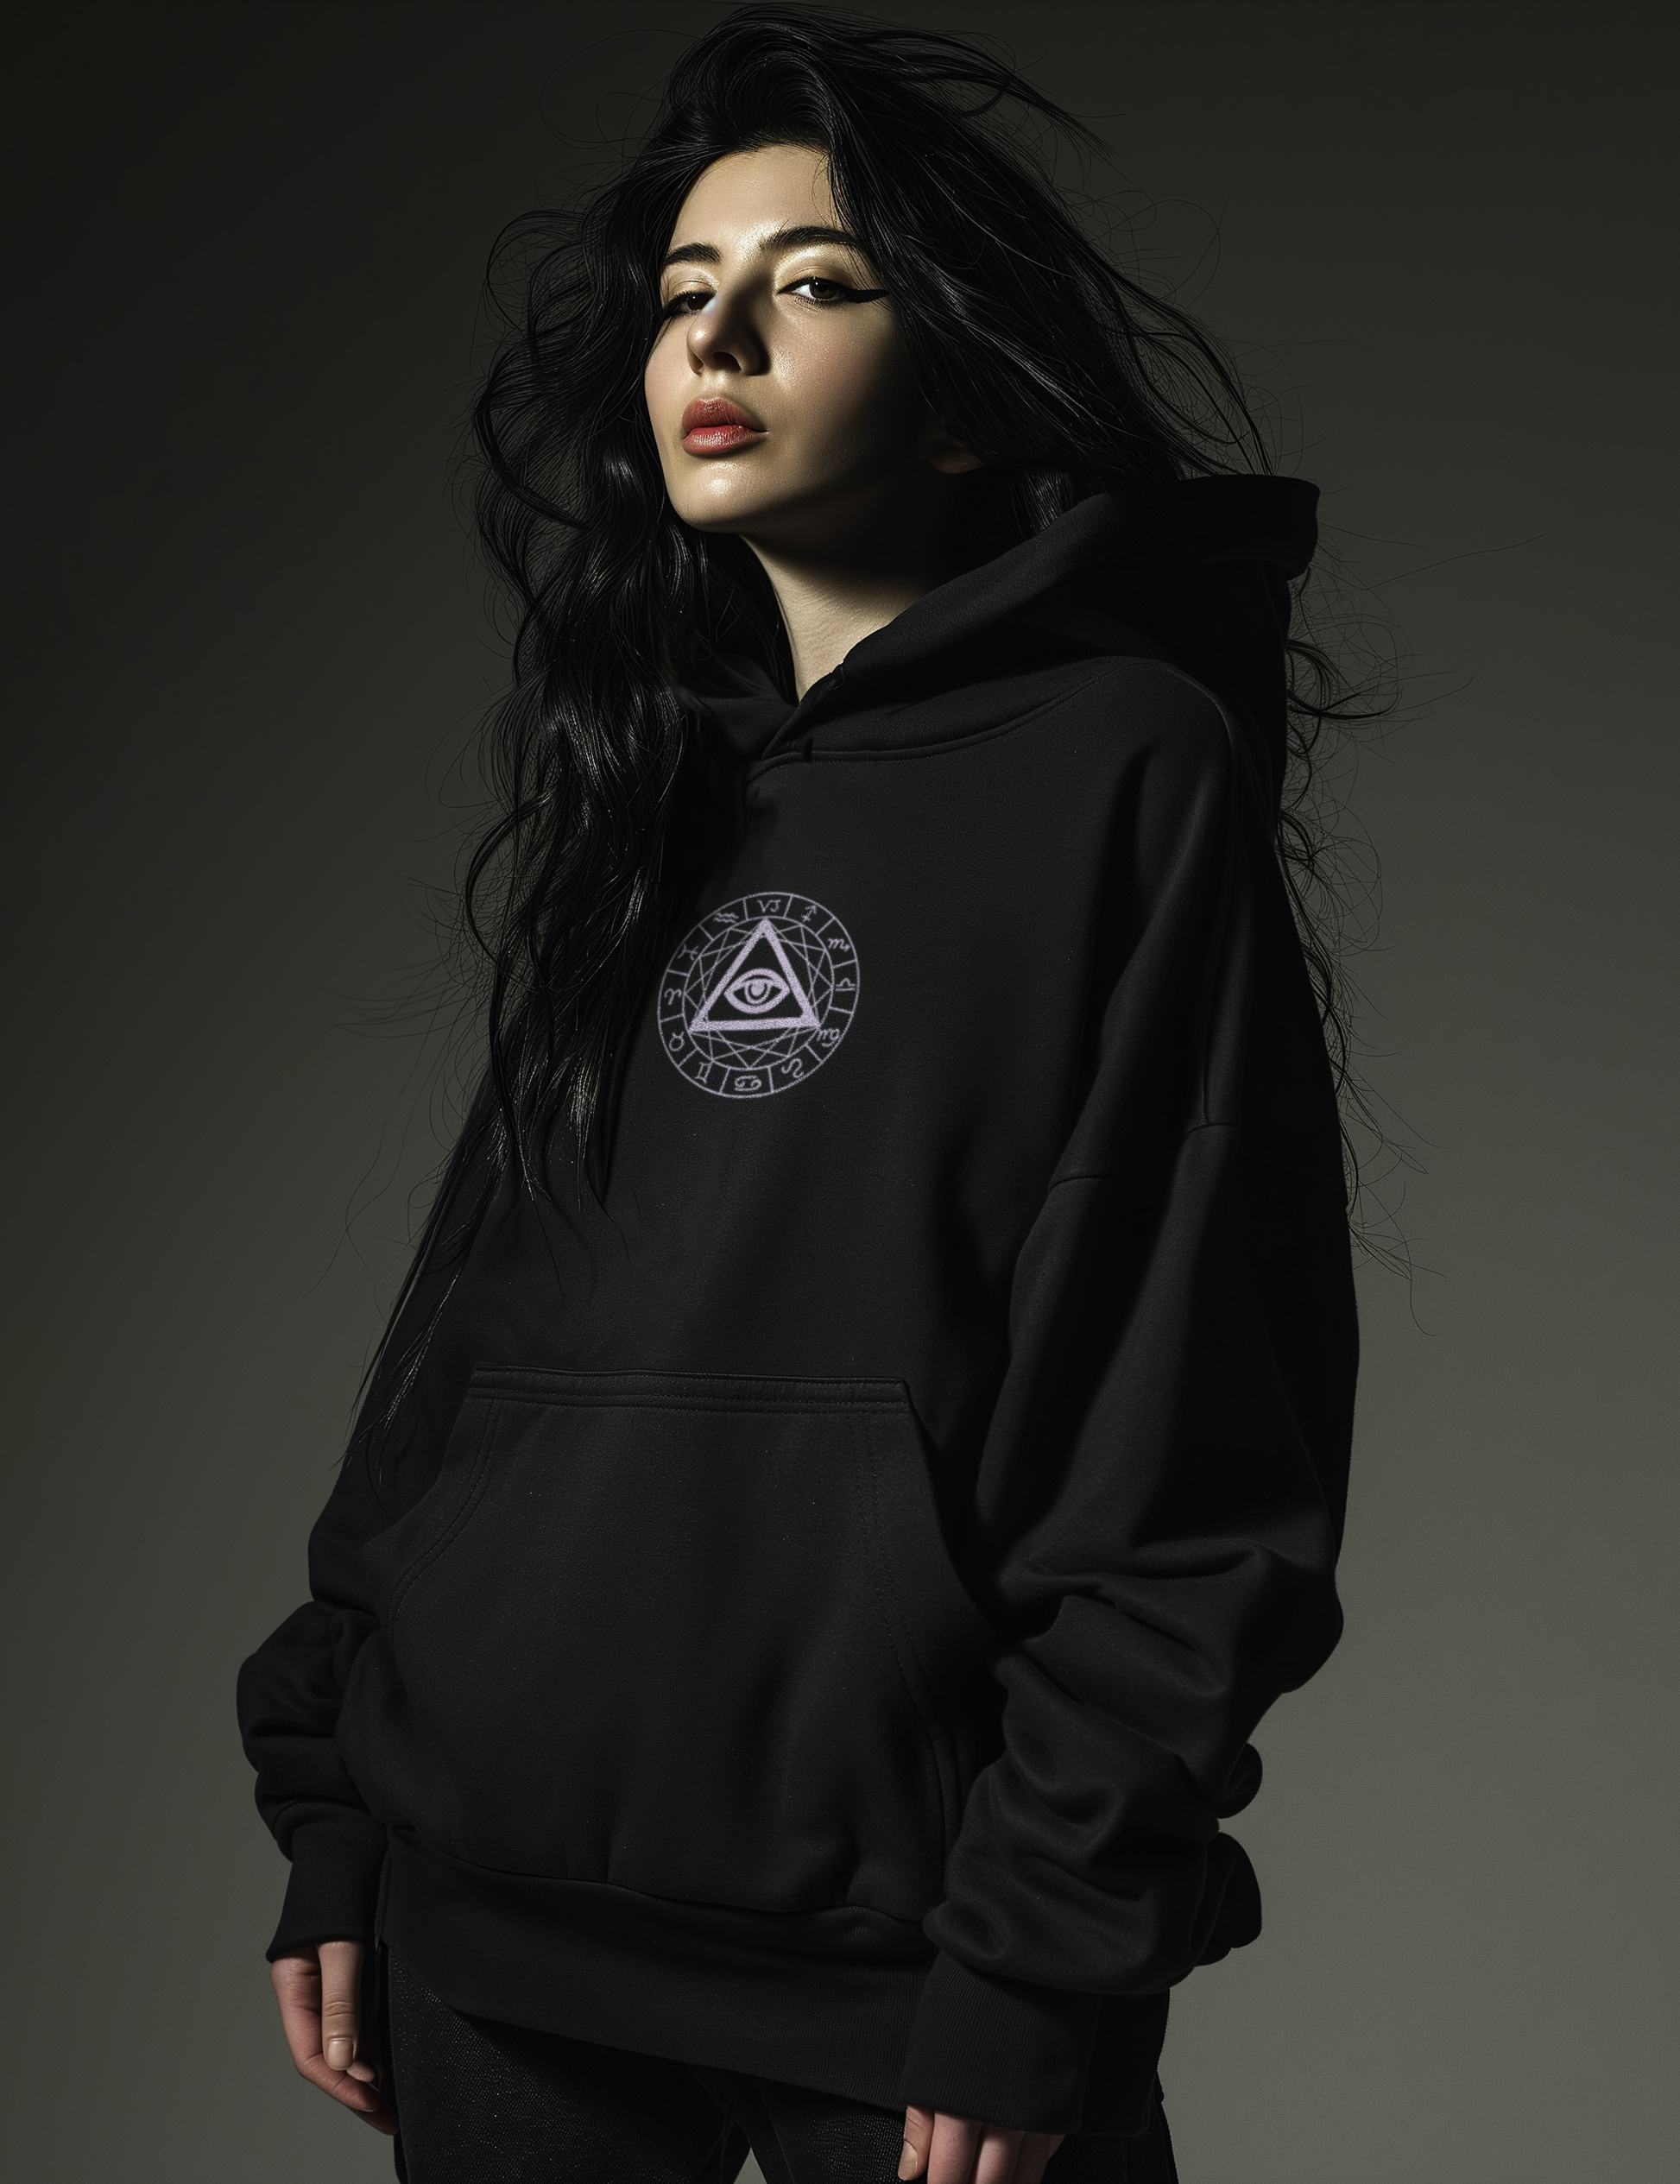 As Above So Below Occult Collage Witchy Plus Size Goth Hoodie